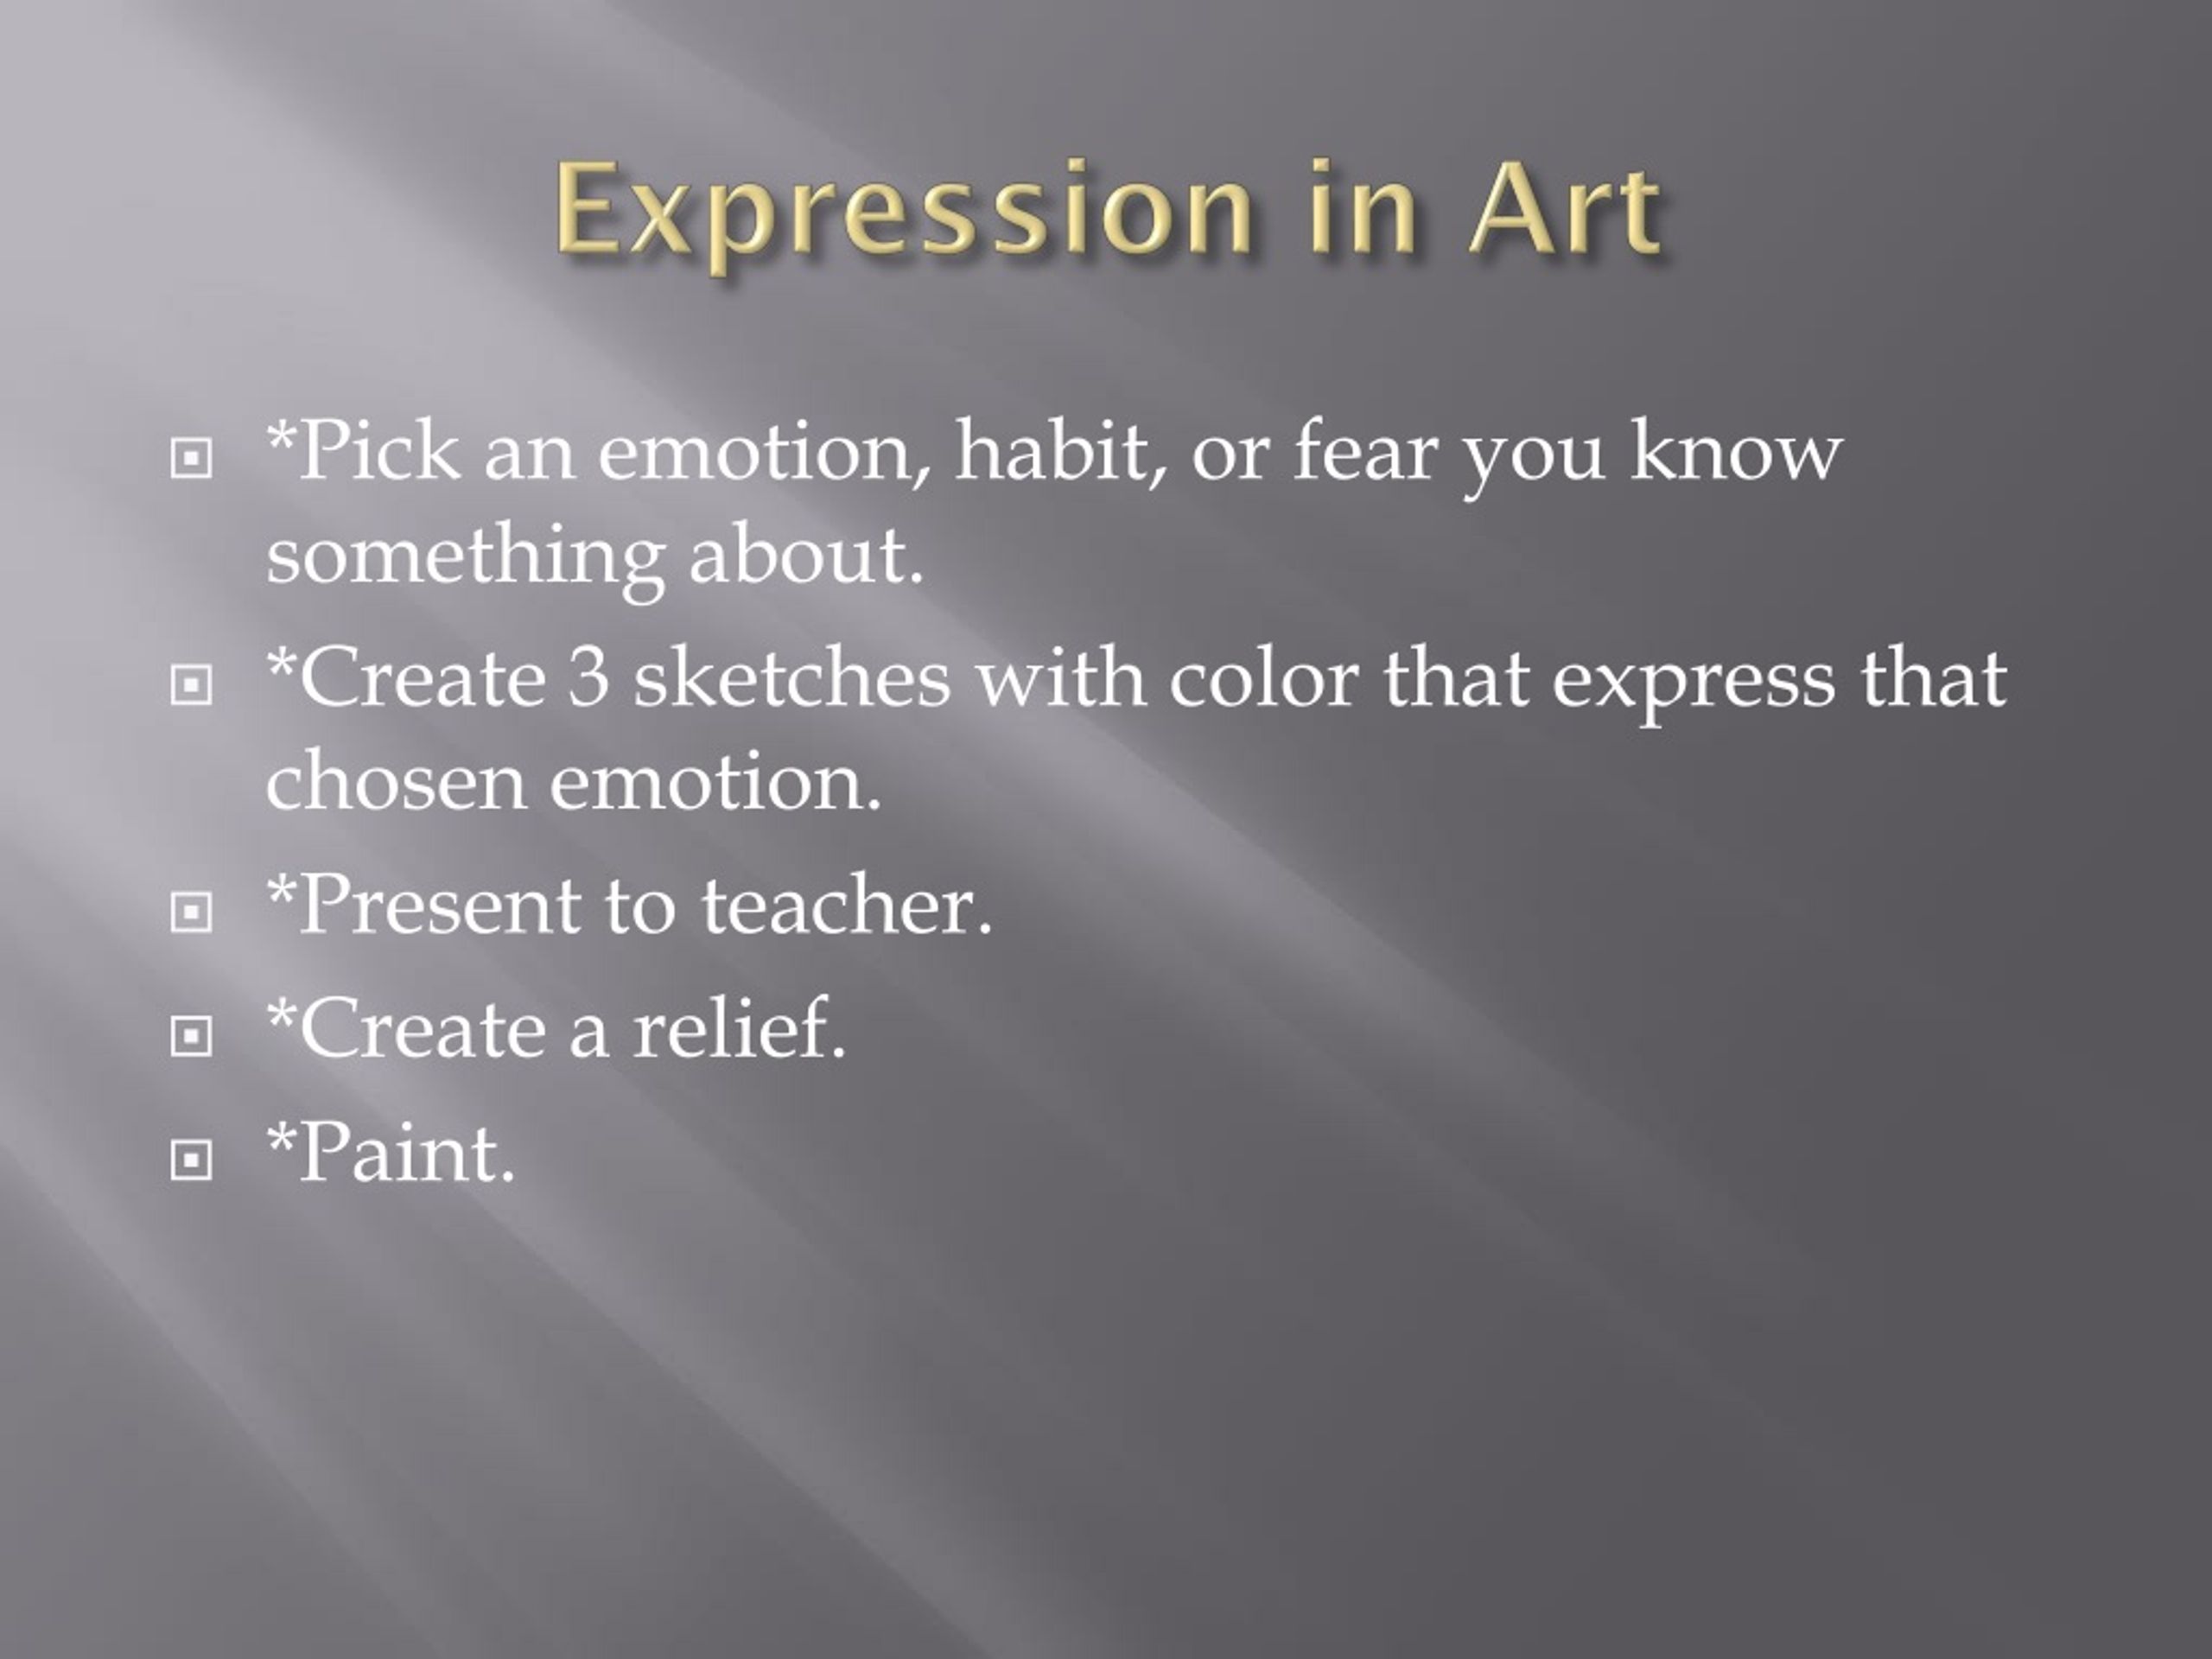 essay on art is an expression